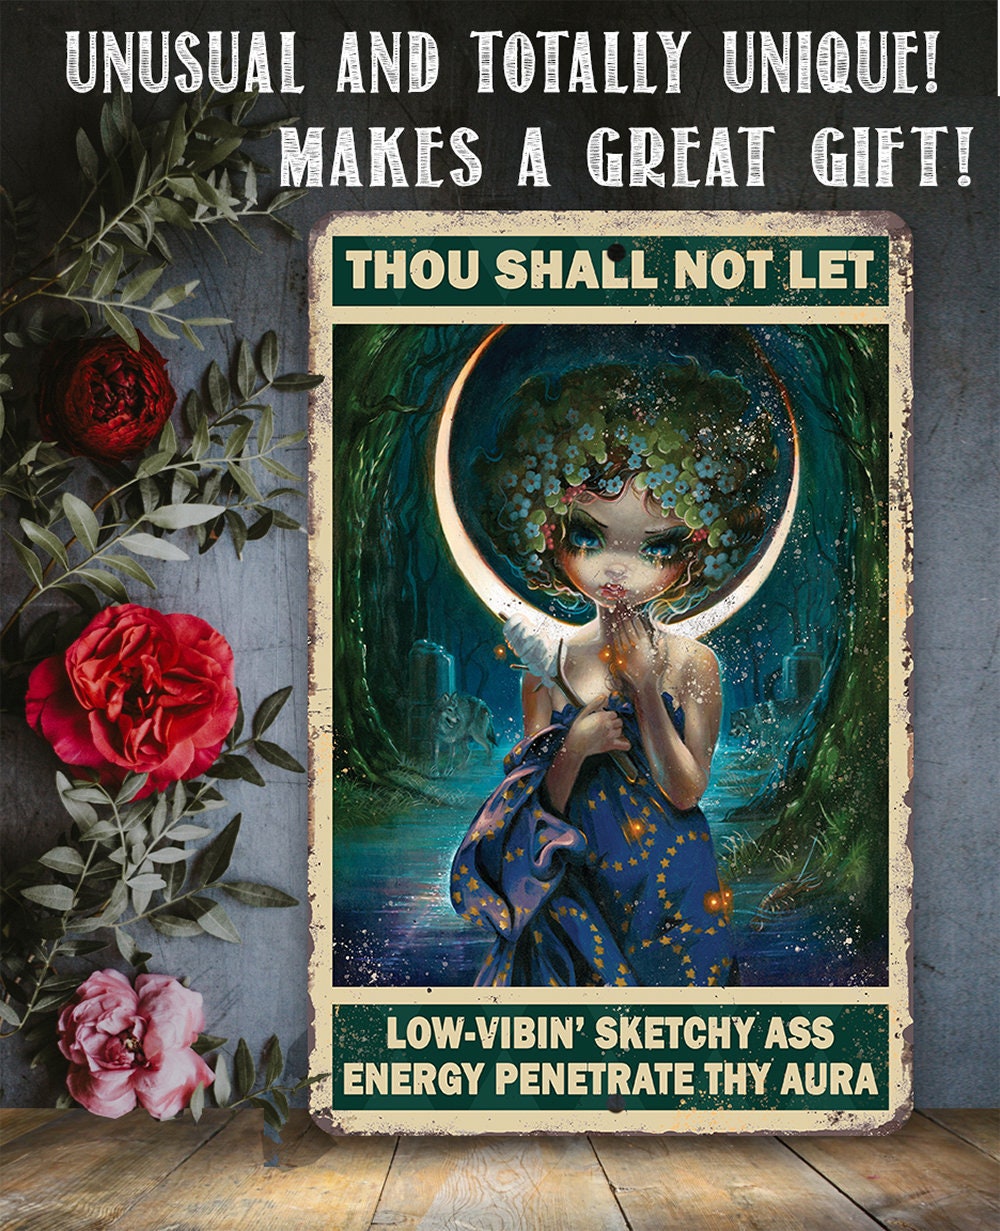 Thou Shall Not Let Penetrate Thy Aura - Metal Sign Lone Star Art 